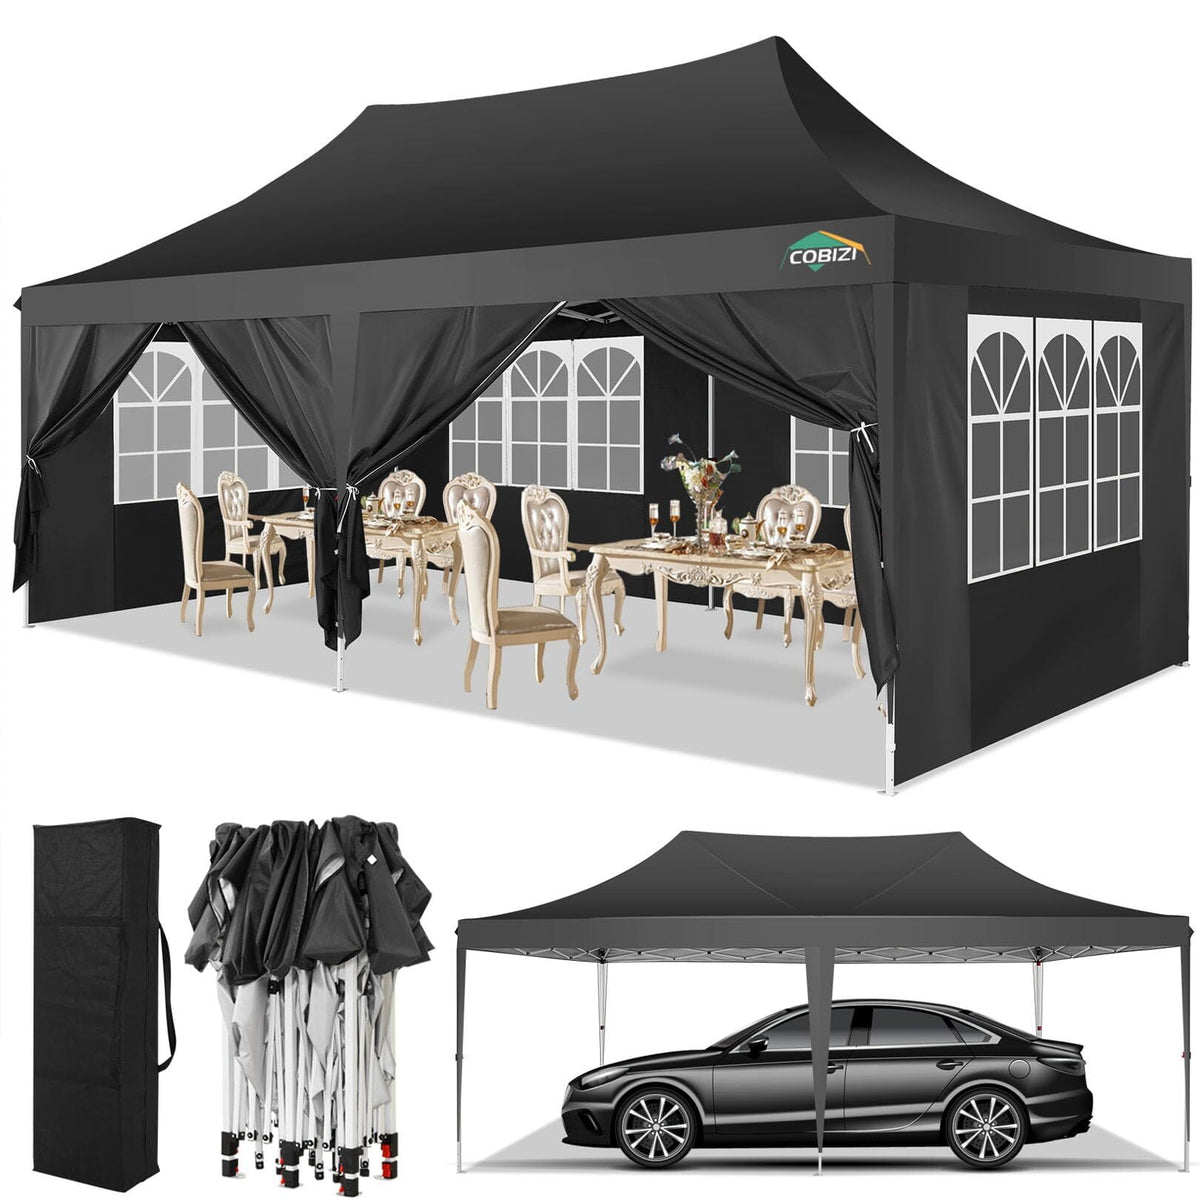 COBIZI 10x20 Pop Up Canopy Tent with 6 Removable Sidewalls, Easy Up Commercial Canopy, Adjustable Heights, Waterproof and UV50+ Gazebo with Portable Bag, Party Tents for Parties, Black